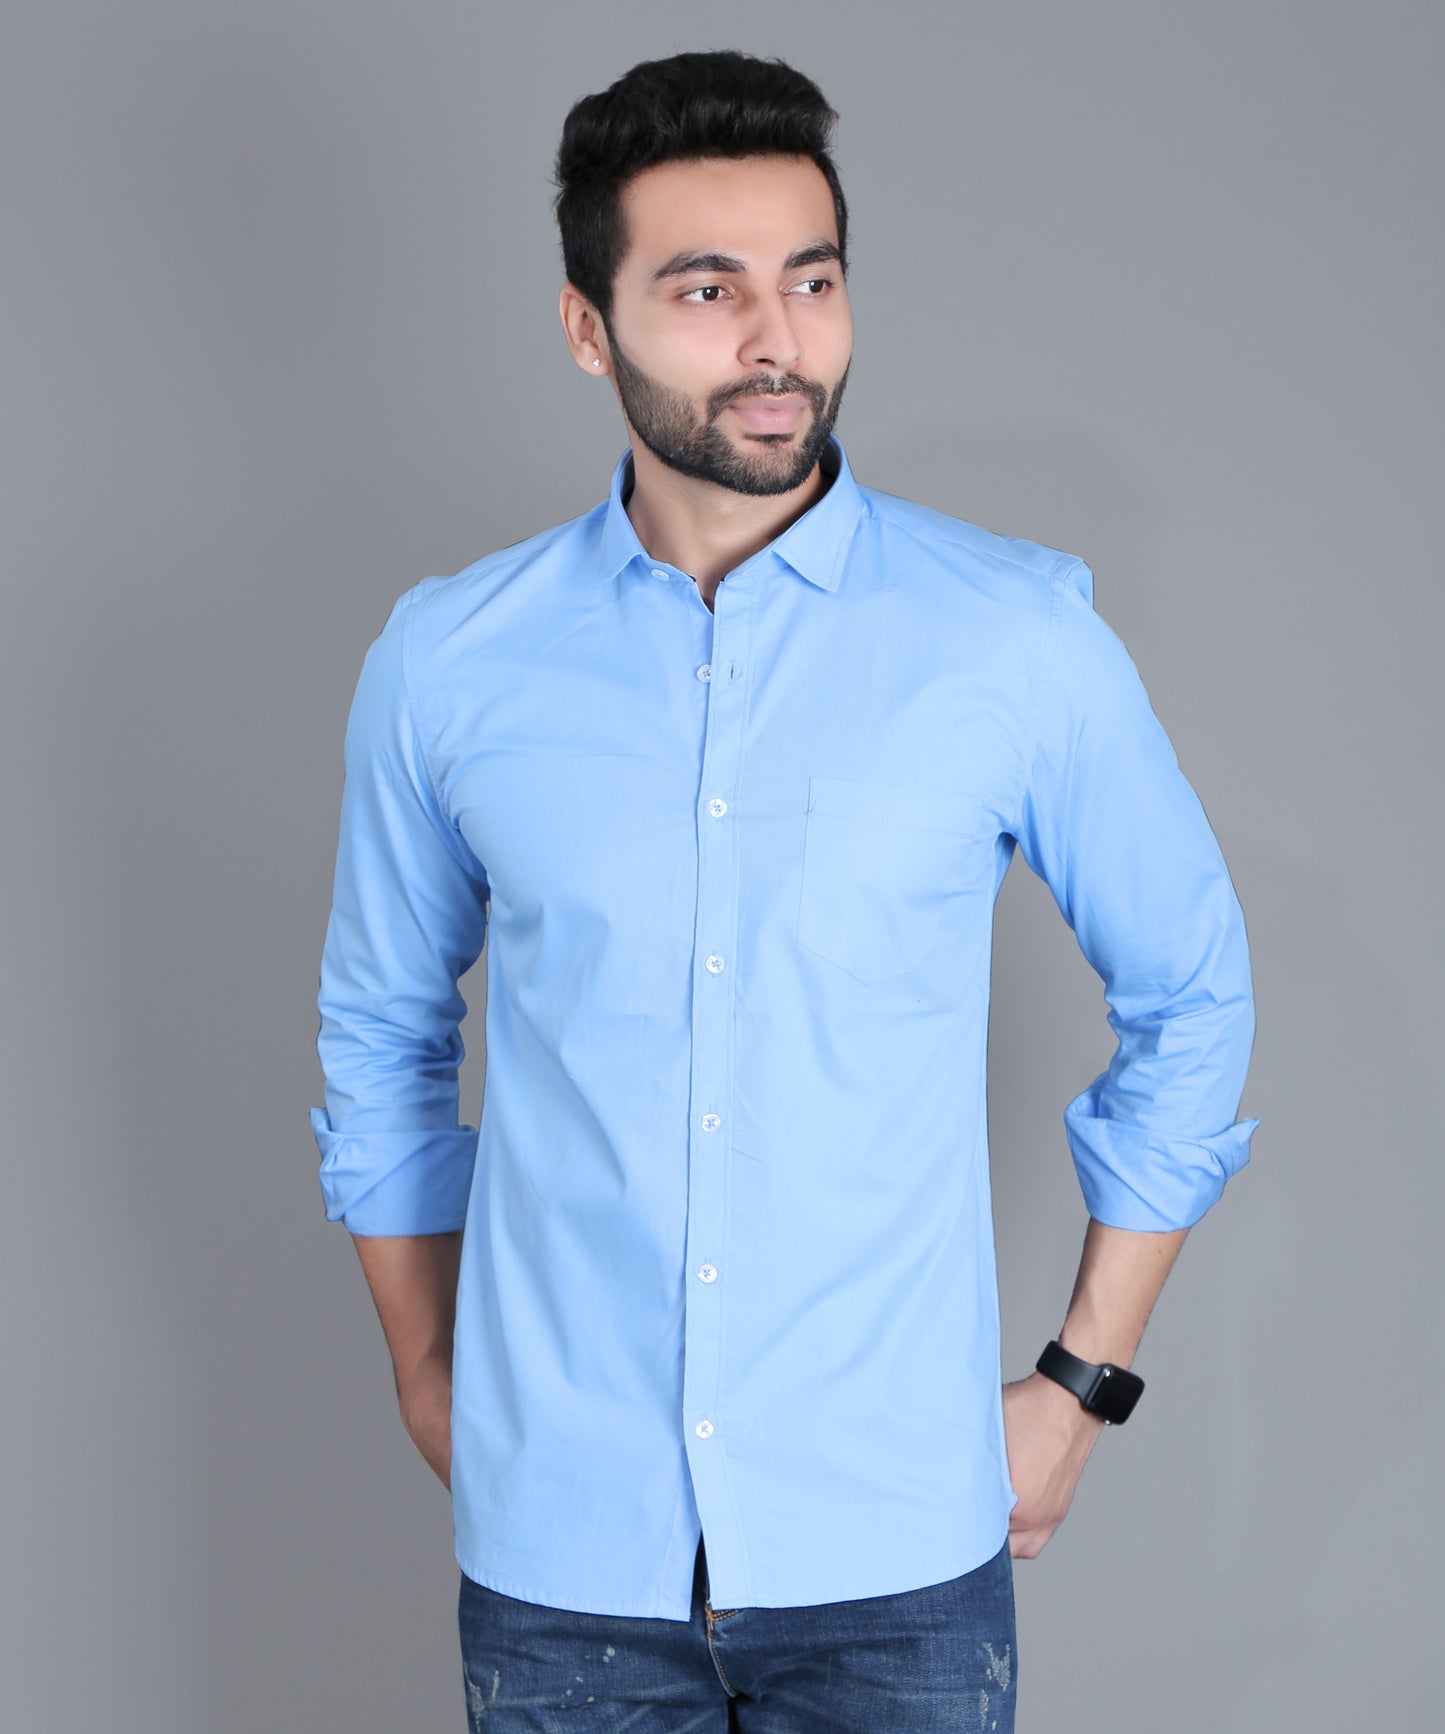 5thanfold Men's Casual Pure Cotton Full Sleeve Solid Sky Blue Slim Fit Shirt